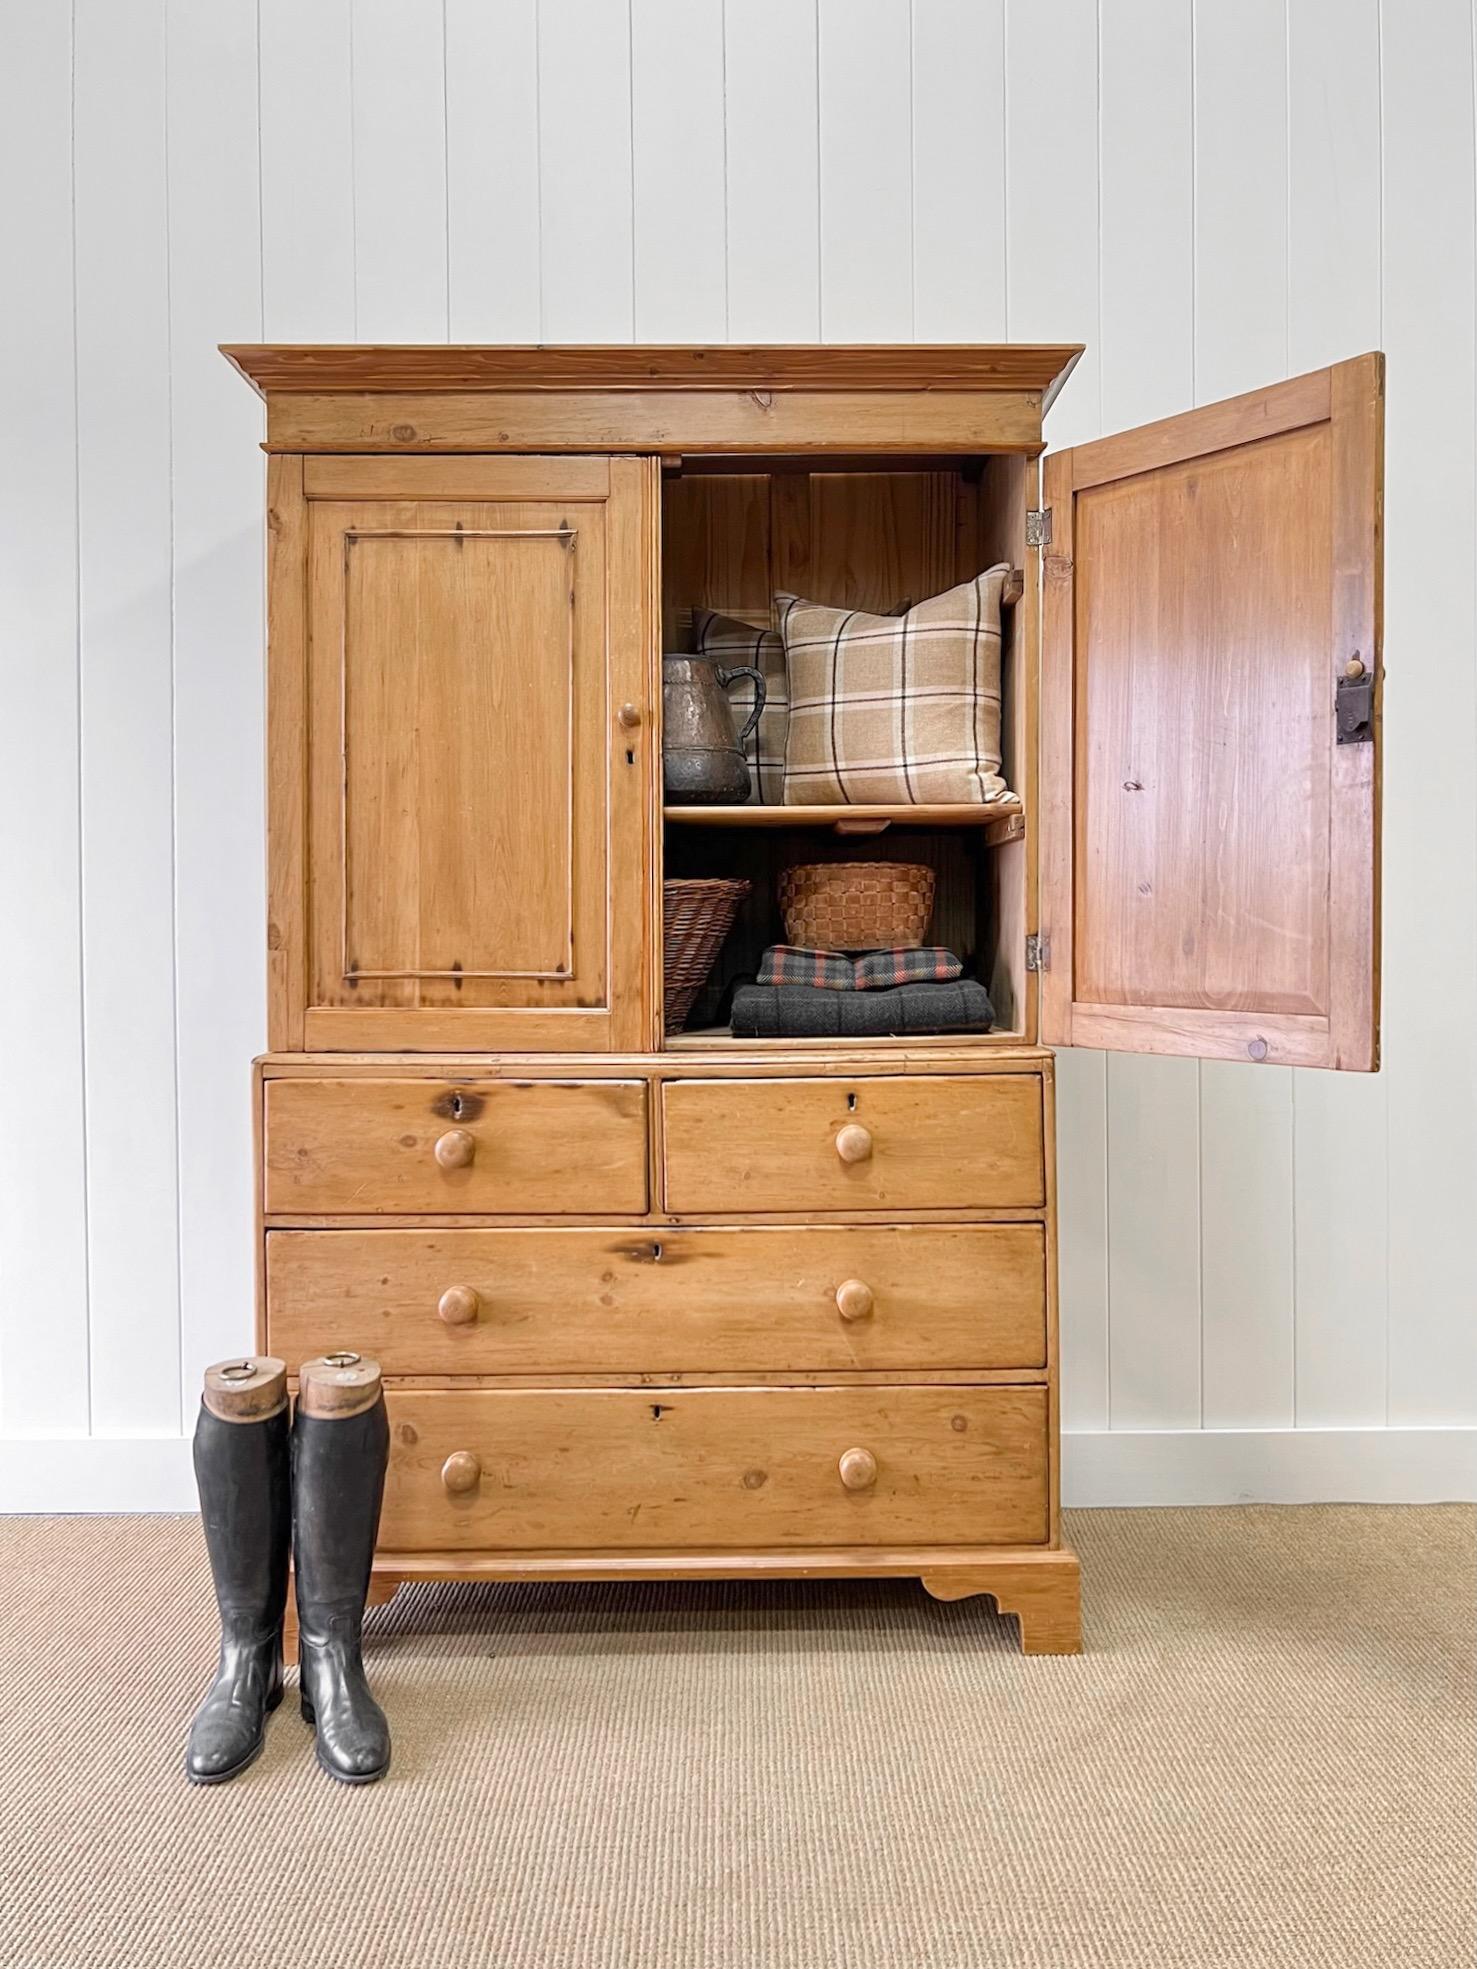 A large and very good antique English pine linen press cupboard. Top portion with stationary shelving. Lower portion with 2 over 2 drawer configuration.  Wooden knob hardware. Dovetail construction. The top is detachable from the bottom for ease of